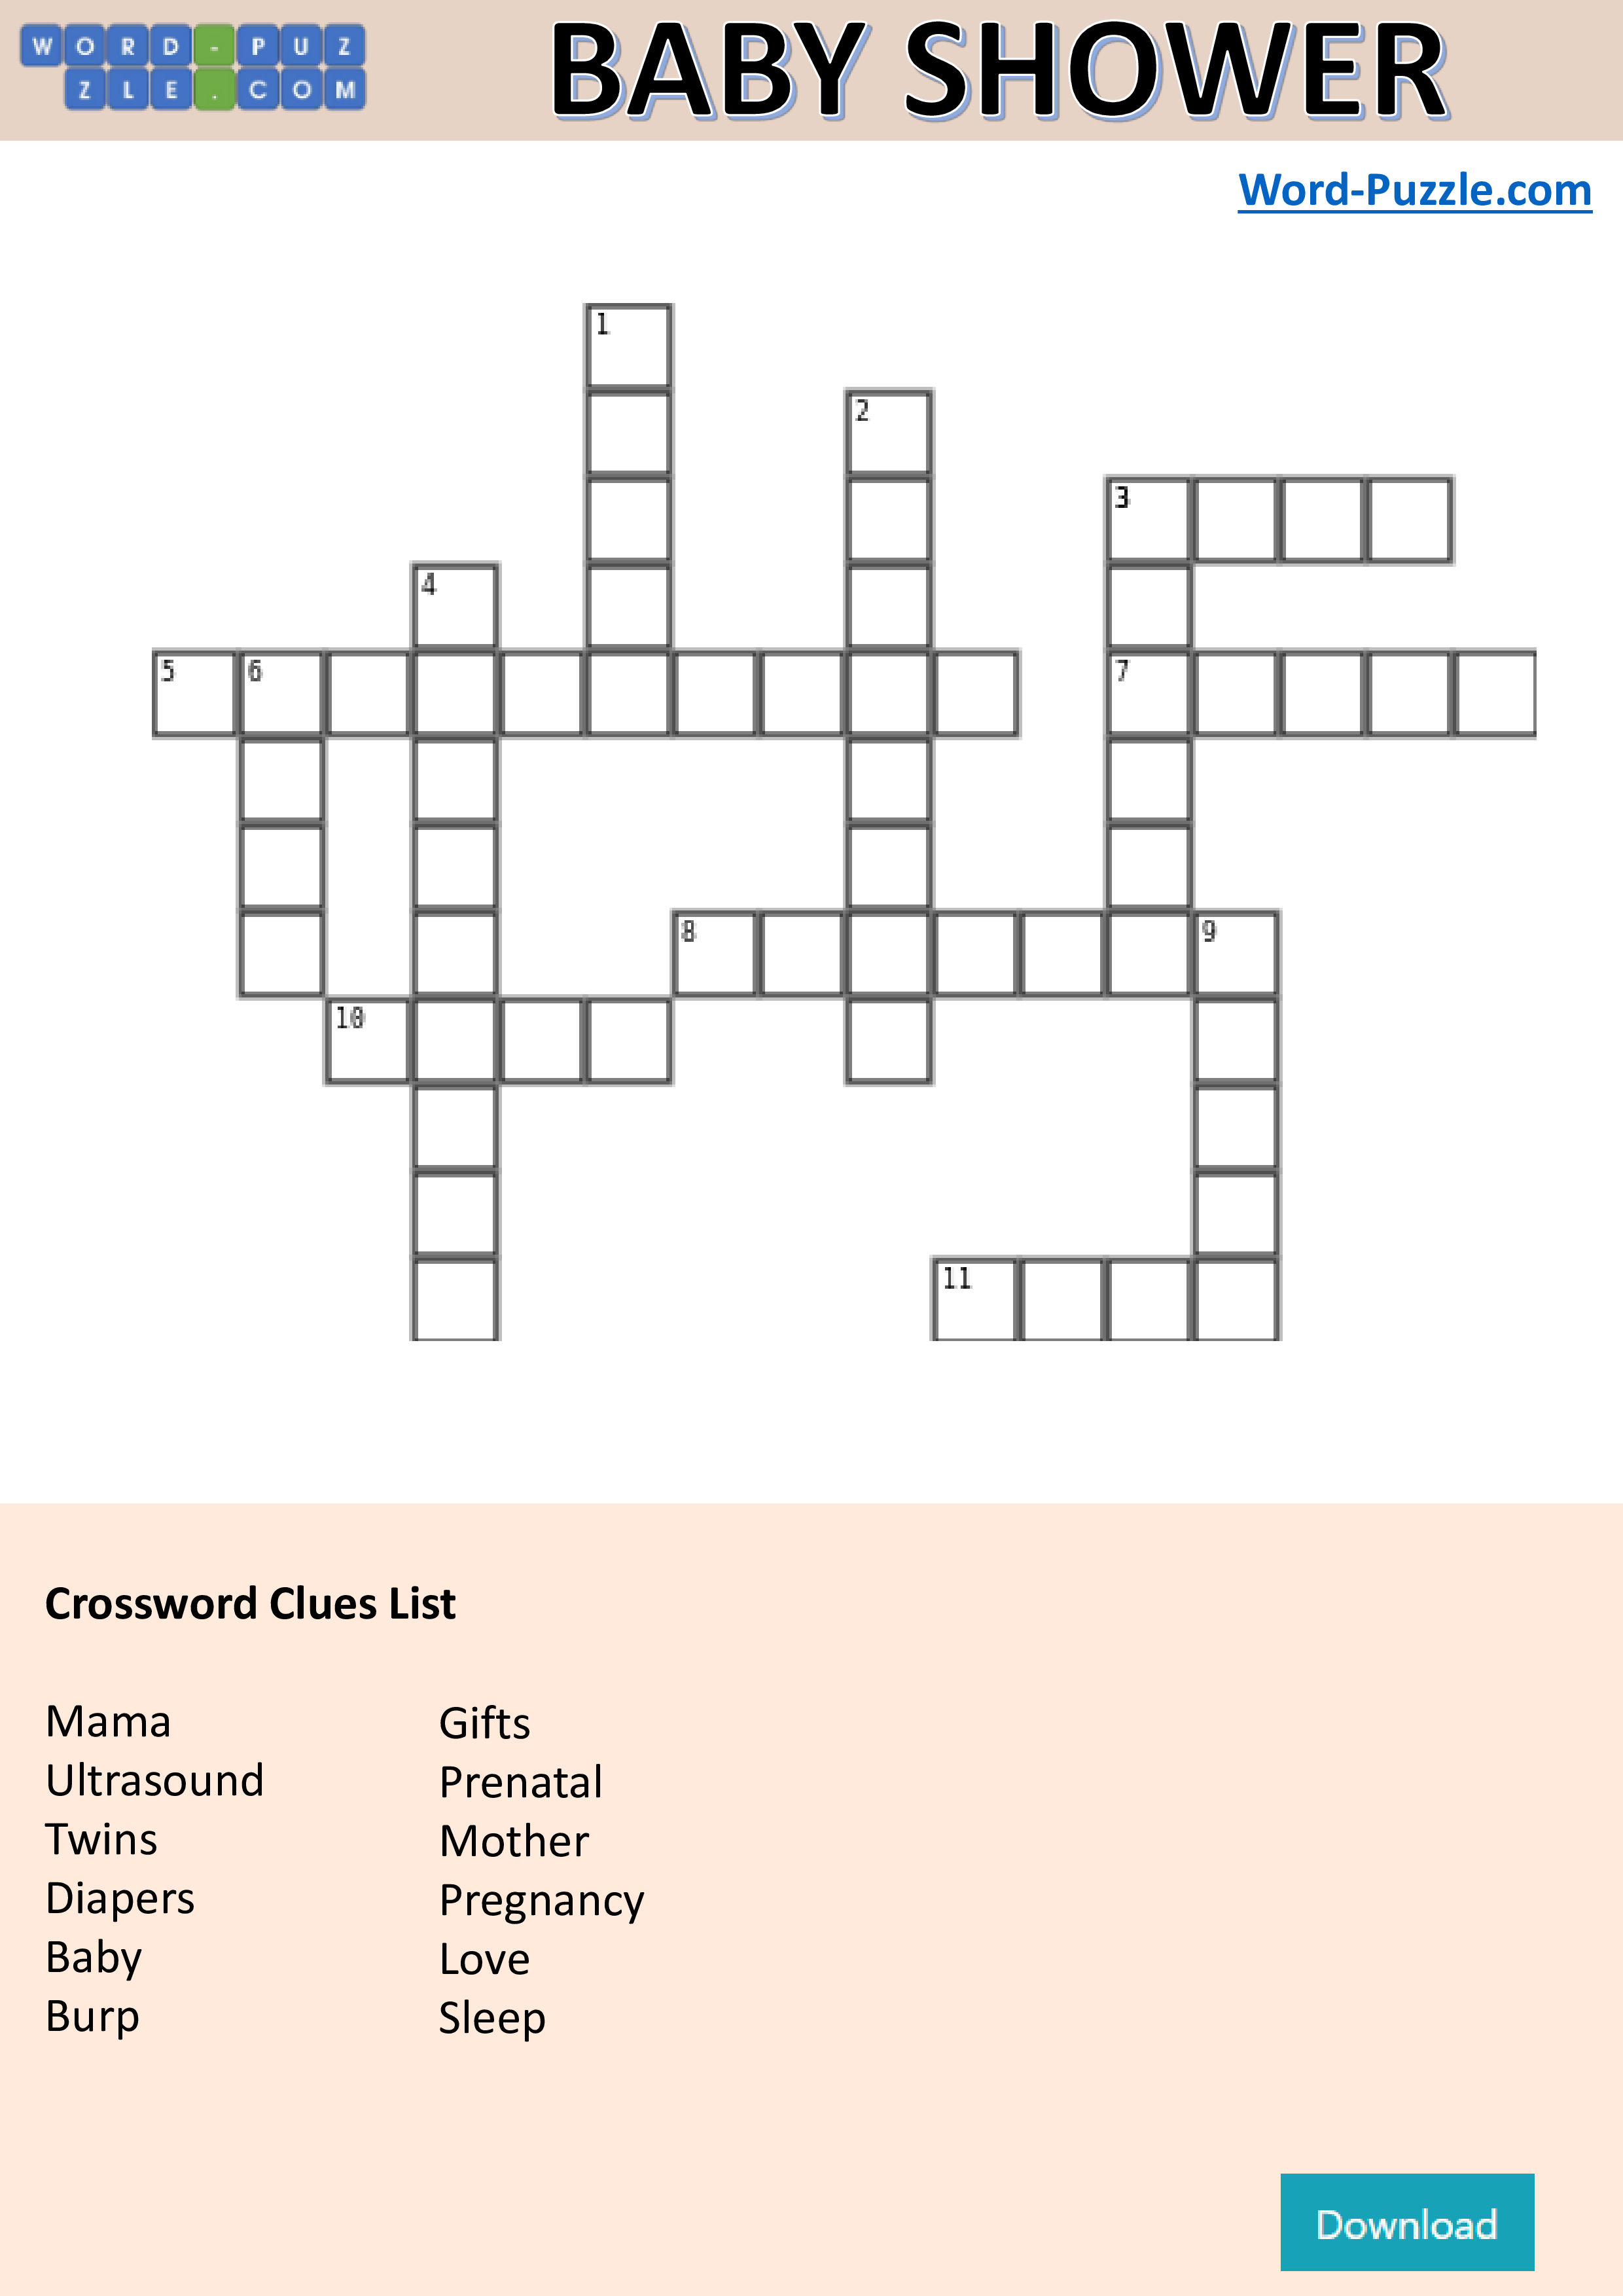 Crosswords Puzzle Baby Shower main image